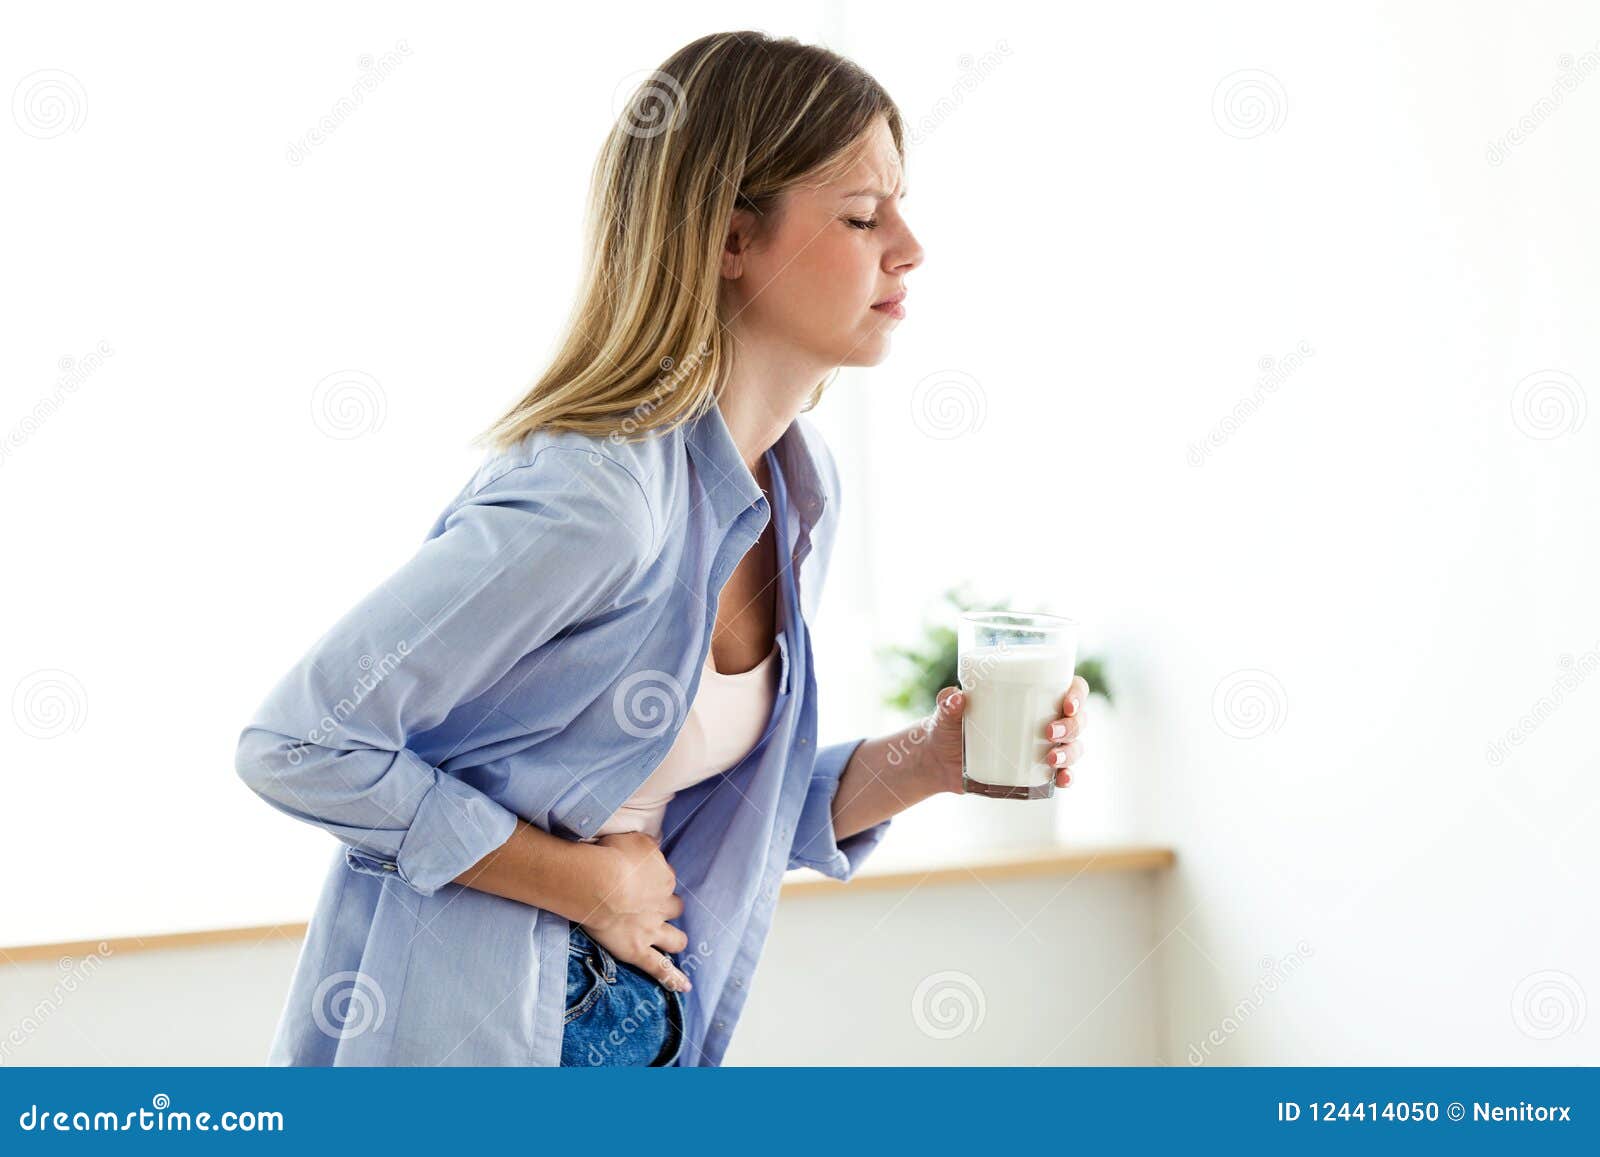 unhealthy young woman with stomachache holding a glass with milk at home.